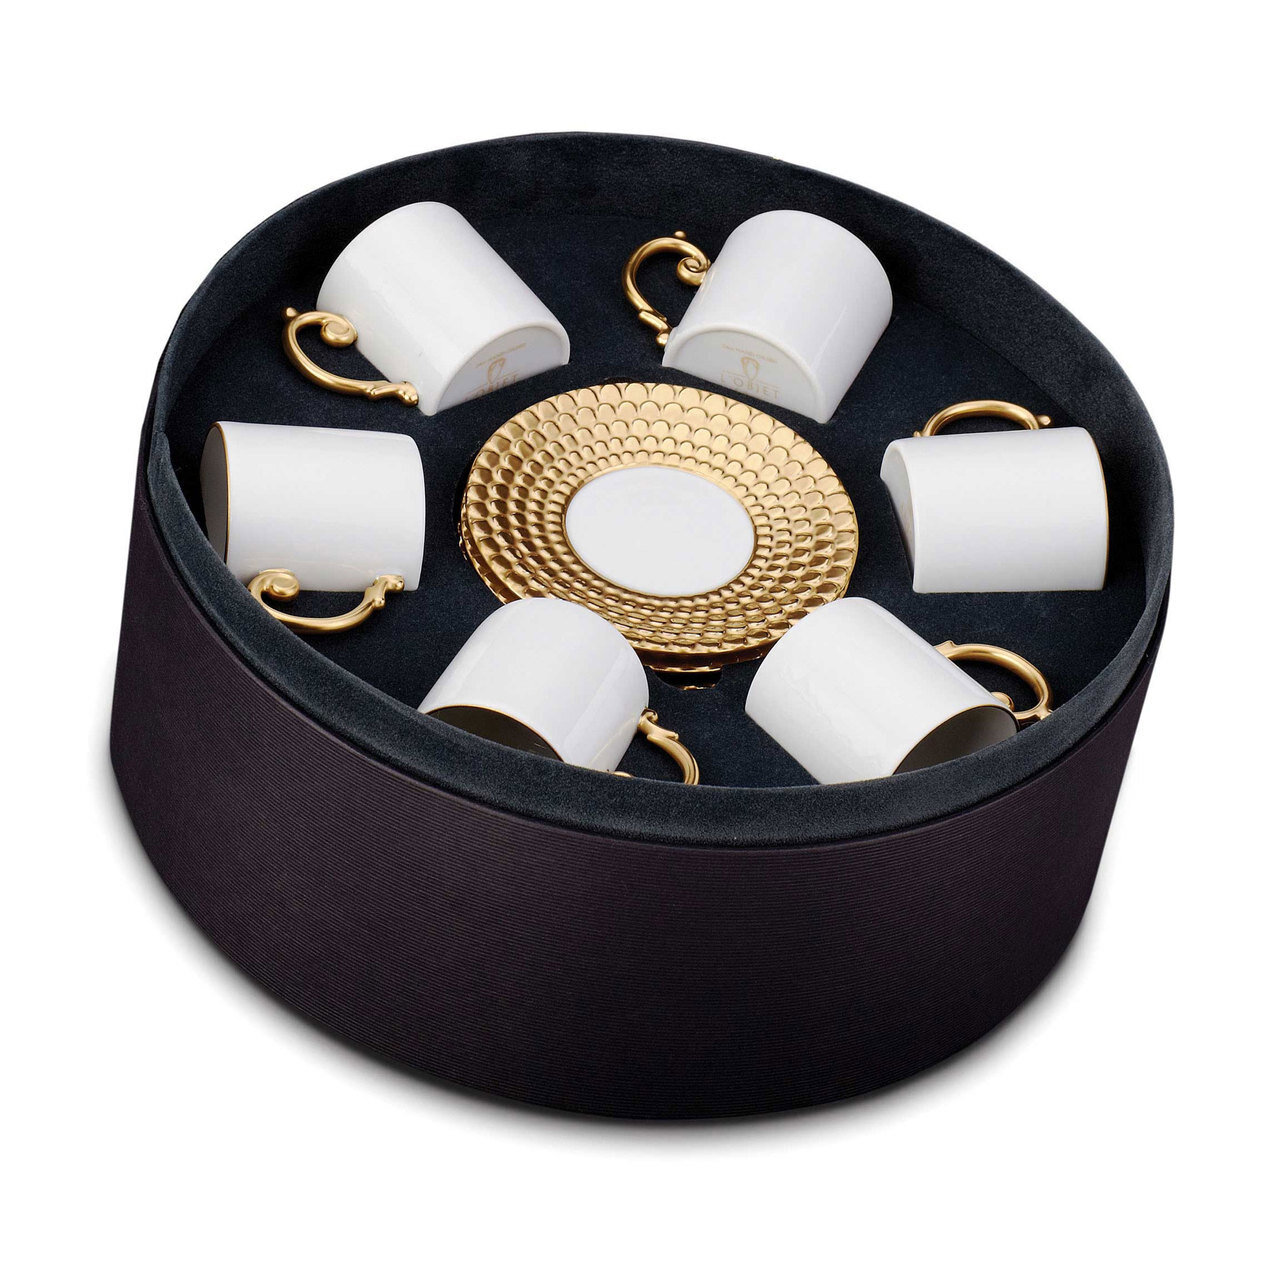 L'Objet Aegean Espresso Cup and Saucer Gift Box of 6 Gold